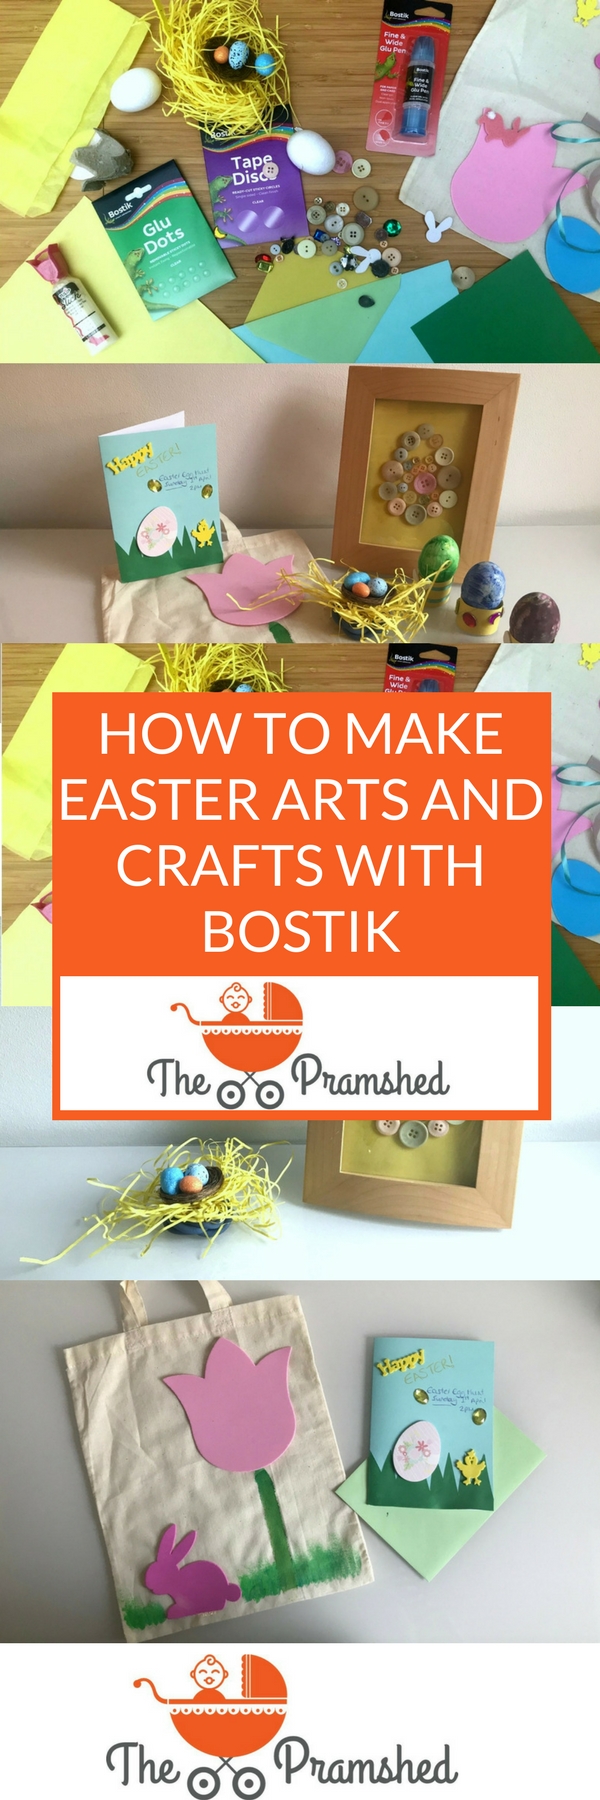 Easter Arts and Crafts with Bostik